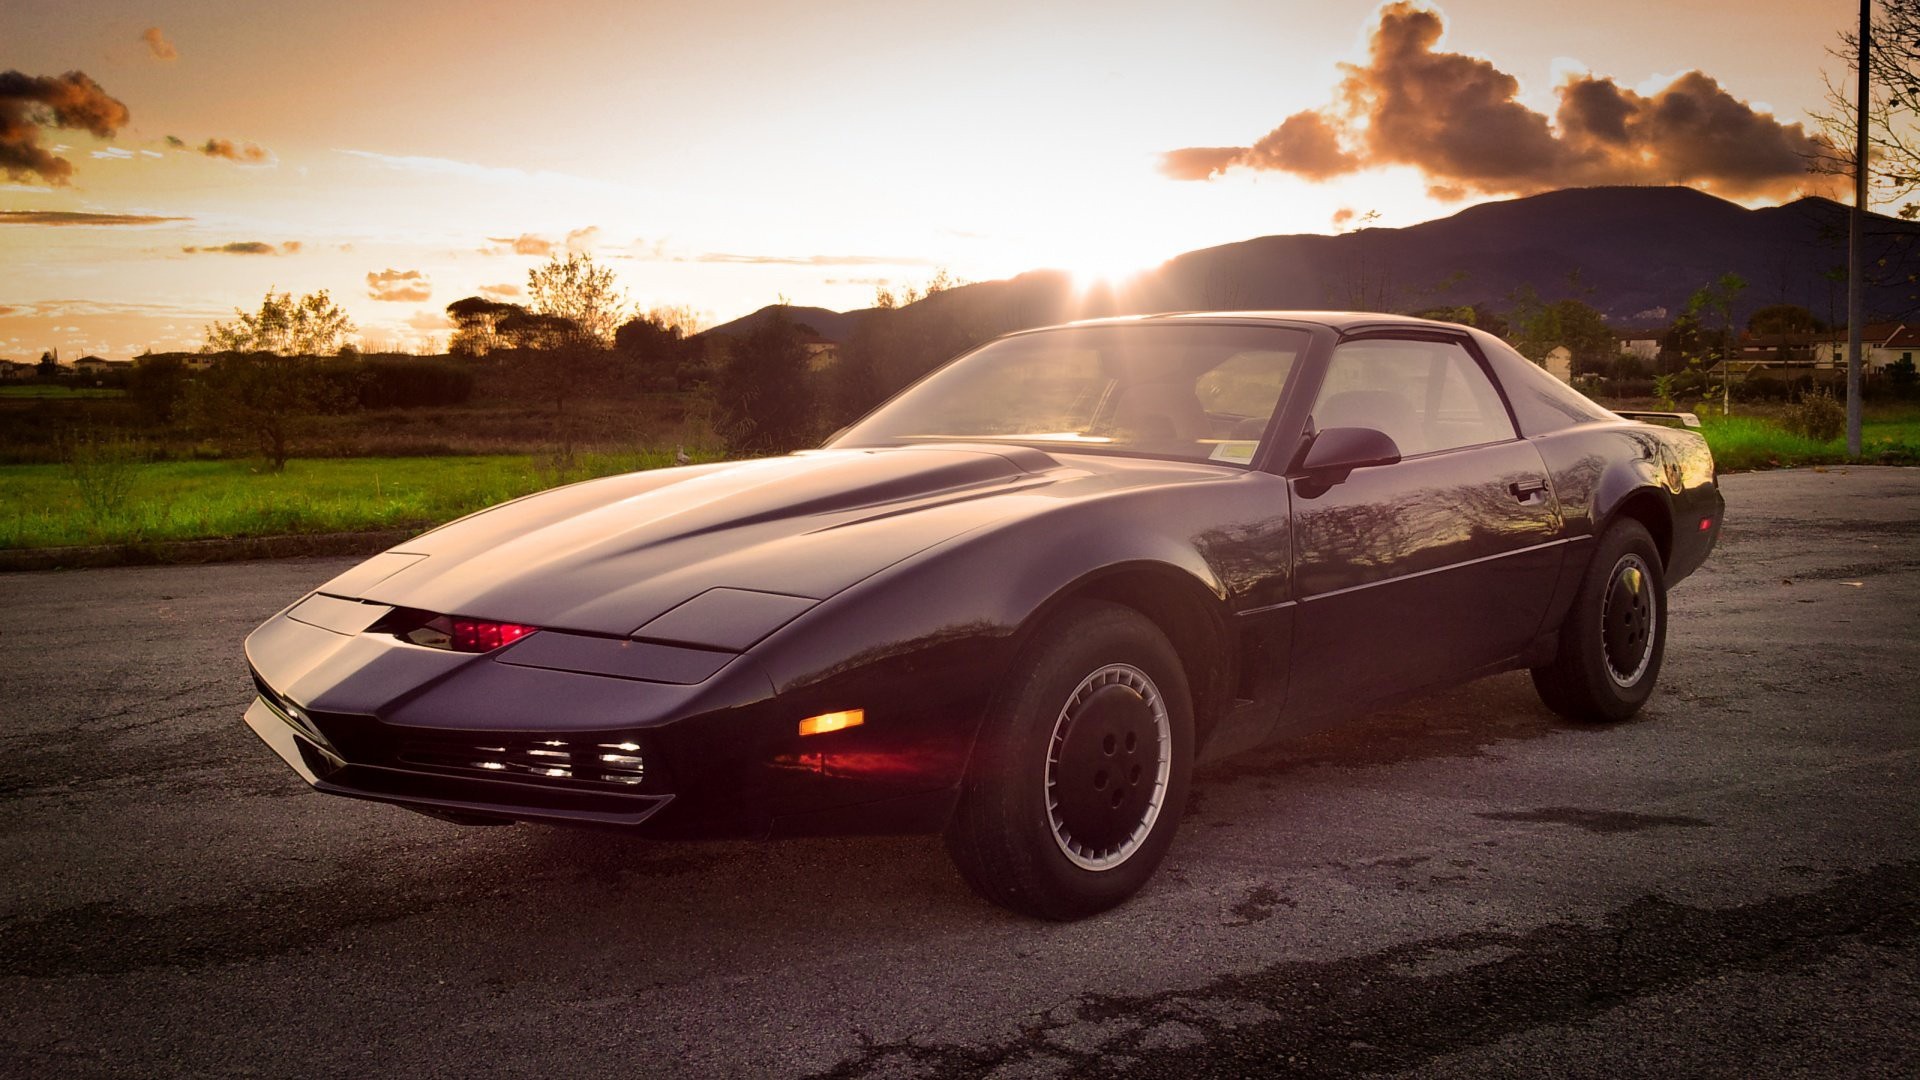 Knight Rider TV series, Knight Industries Two Thousand, Gallery, Photos, 1920x1080 Full HD Desktop